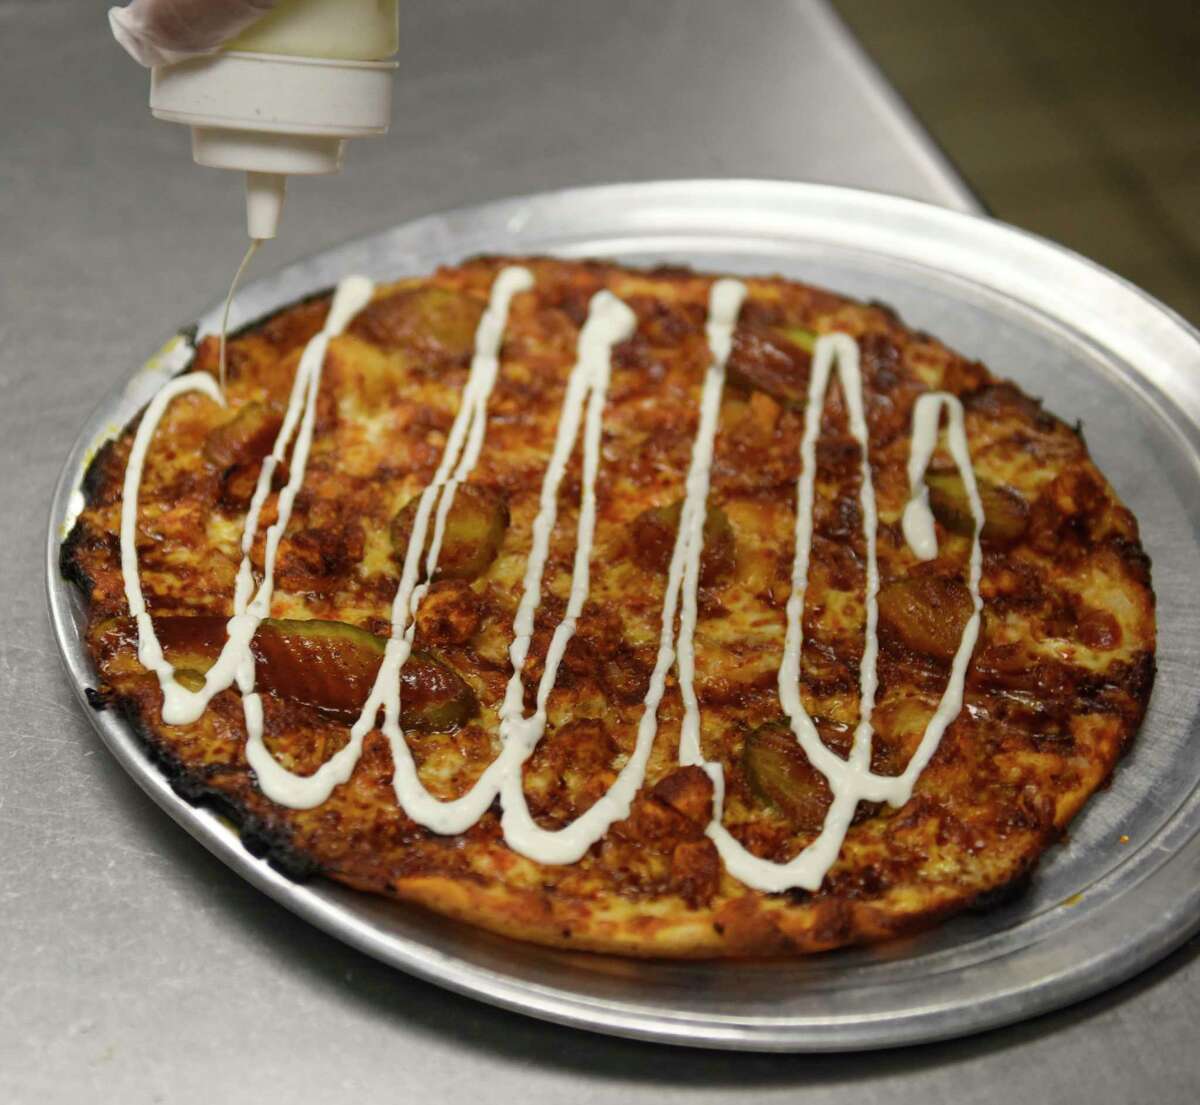 Eduardo Sanchez tops a hot Nashville chicken pizza with ranch dressing on opening day of Riko's Pizza in Stamford, Conn. on Tuesday, April 5, 2022. Riko's Pizza opened a new location at the 2010 West Main St. in Stamford.  The menu offers a variety of thin crust pizzas, including the famous hot oil pizza, as well as salad pizzas, hot wings and a full bar with an innovative cocktail menu.